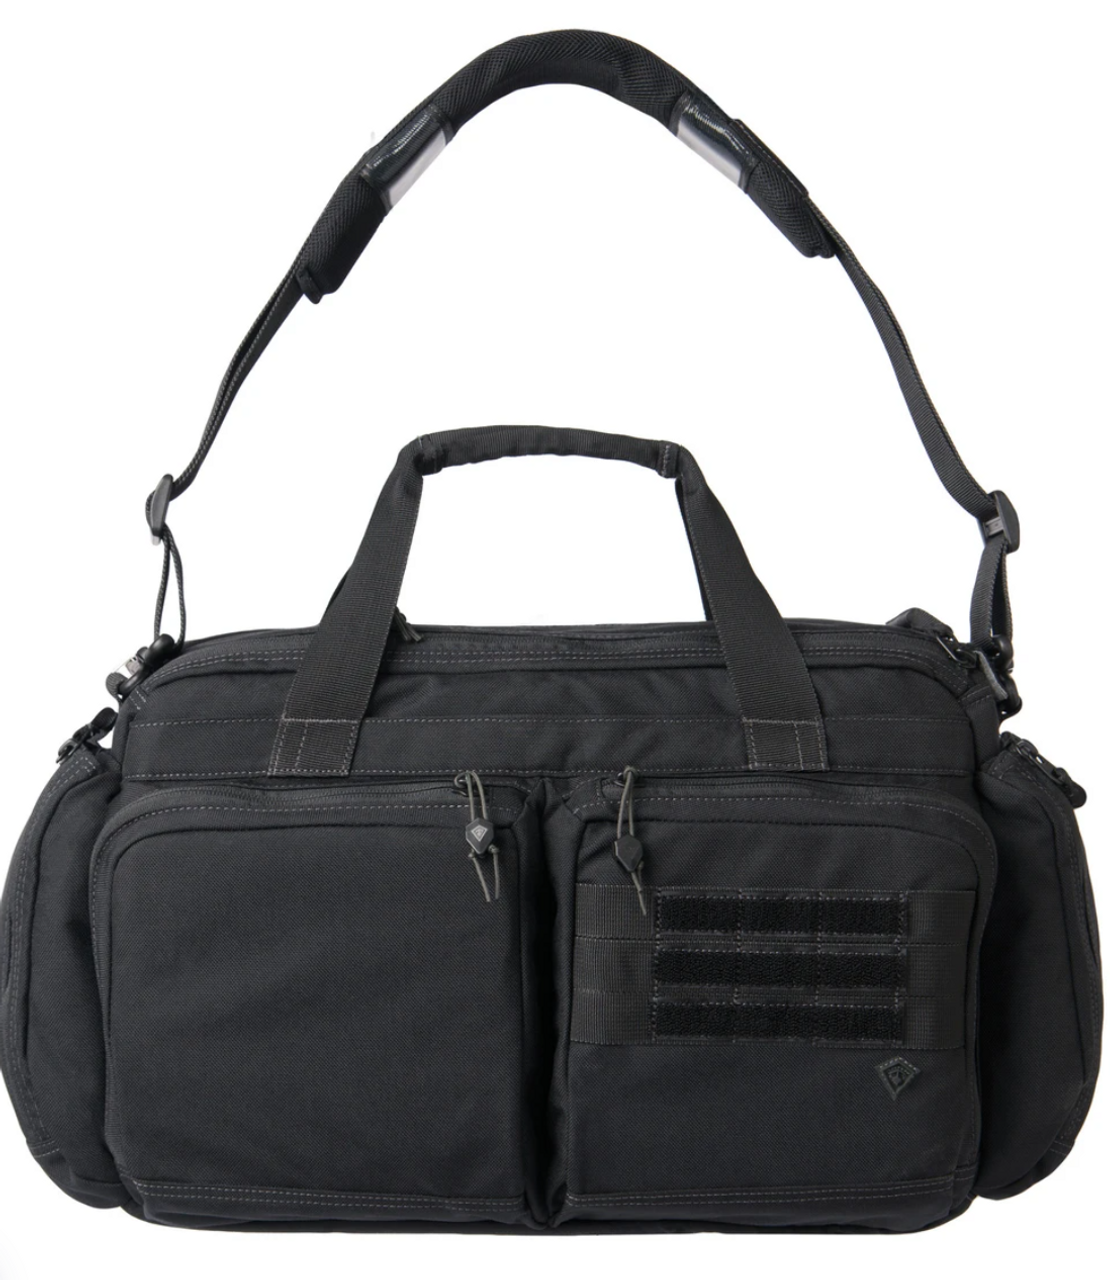 This briefcase style office-to-field bag is designed to provide all of the room and durability you require to carry out your duty. Double strength nylon fabric and premium YKK® zippers/Duraflex® hardware gives you a sturdy exterior you can rely on. Foam padded main and computer compartments keep items separate and protected, while three inner drop pockets, hidden front hook/loop secured pocket, and zip out water bottle/gear pockets provide extra storage space with organization.